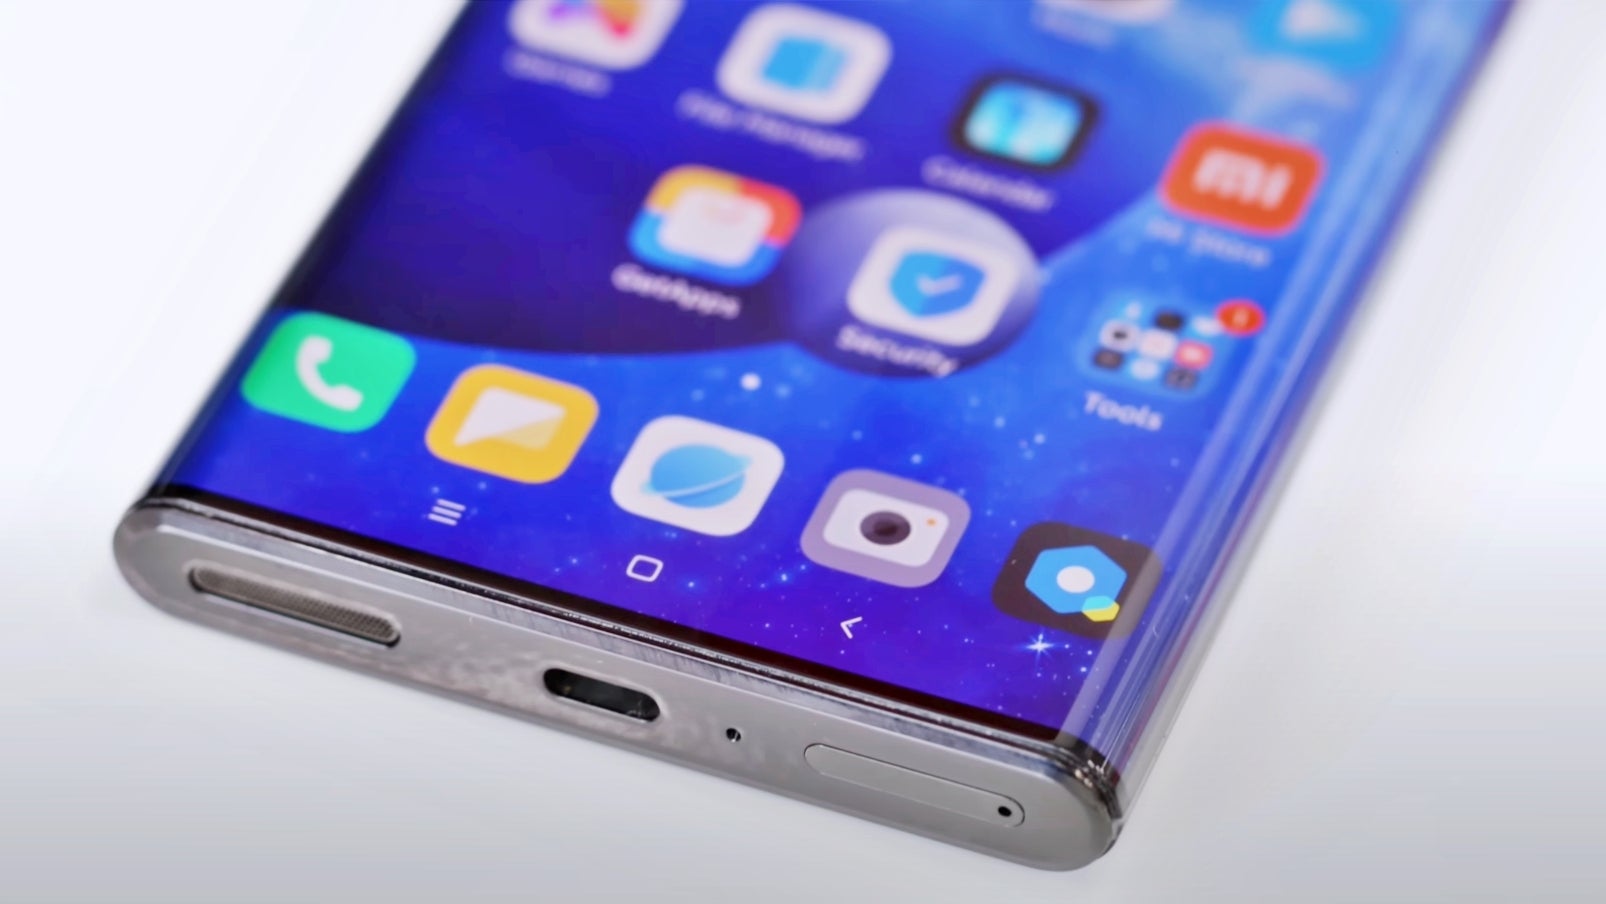 The Futuristic Xiaomi Mi Mix Alpha From 2019 Was An All-Screen Phone (Front And Back) With A Titanium Top And Bottom. But If Bizarre Reports Are To Be Believed, The Future Of Smartphones Might Be 100% Glass. - Iphone 15 Pro, Galaxy S24 Ultra Titanium Design: Apple, Samsung Treat The Symptoms - Not The Cause?